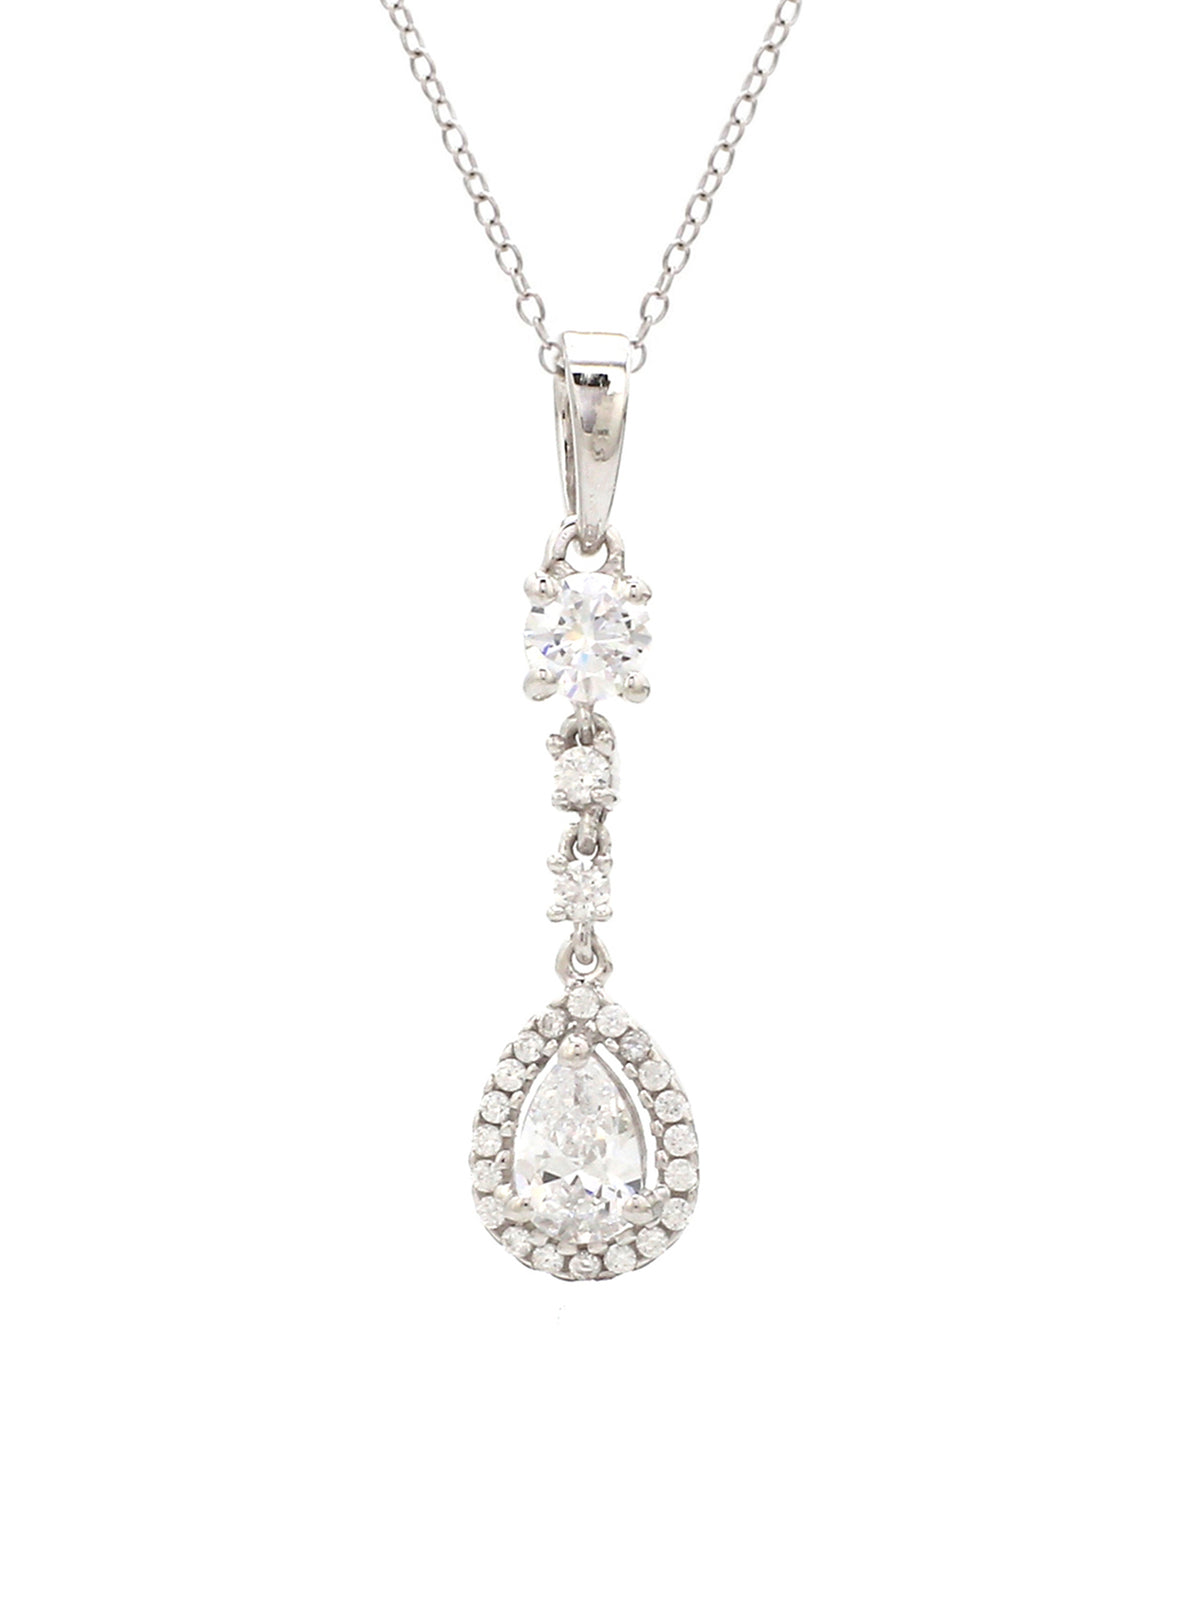 TEARDROP 0.50 CARAT SOLITAIRE PENDANT NECKLACE WITH CHAIN FOR WOMEN